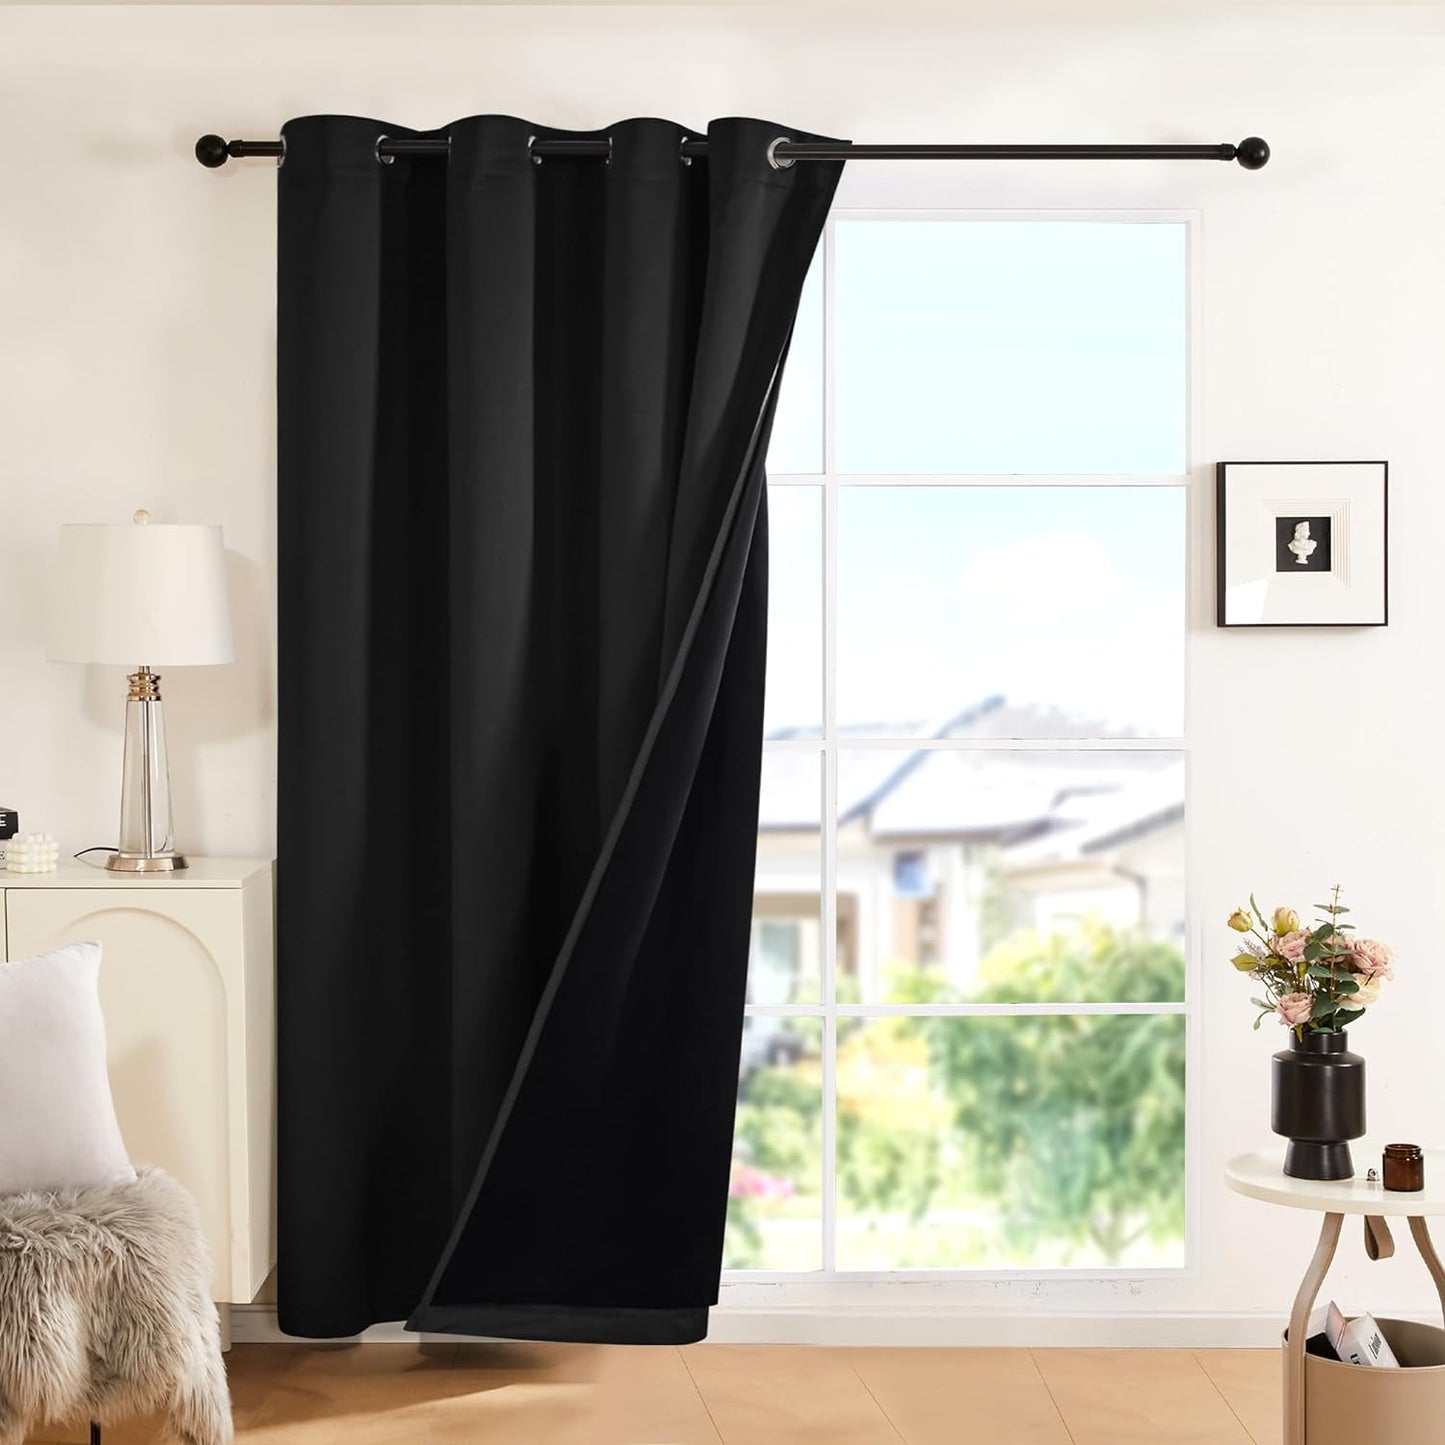 Deconovo 100% White Blackout Curtains, Double Layer Sliding Door Curtain for Living Room, Extra Wide Room Divder Curtains for Patio Door (100W X 84L Inches, Pure White, 1 Panel)  DECONOVO Black 52W X 84L Inch 